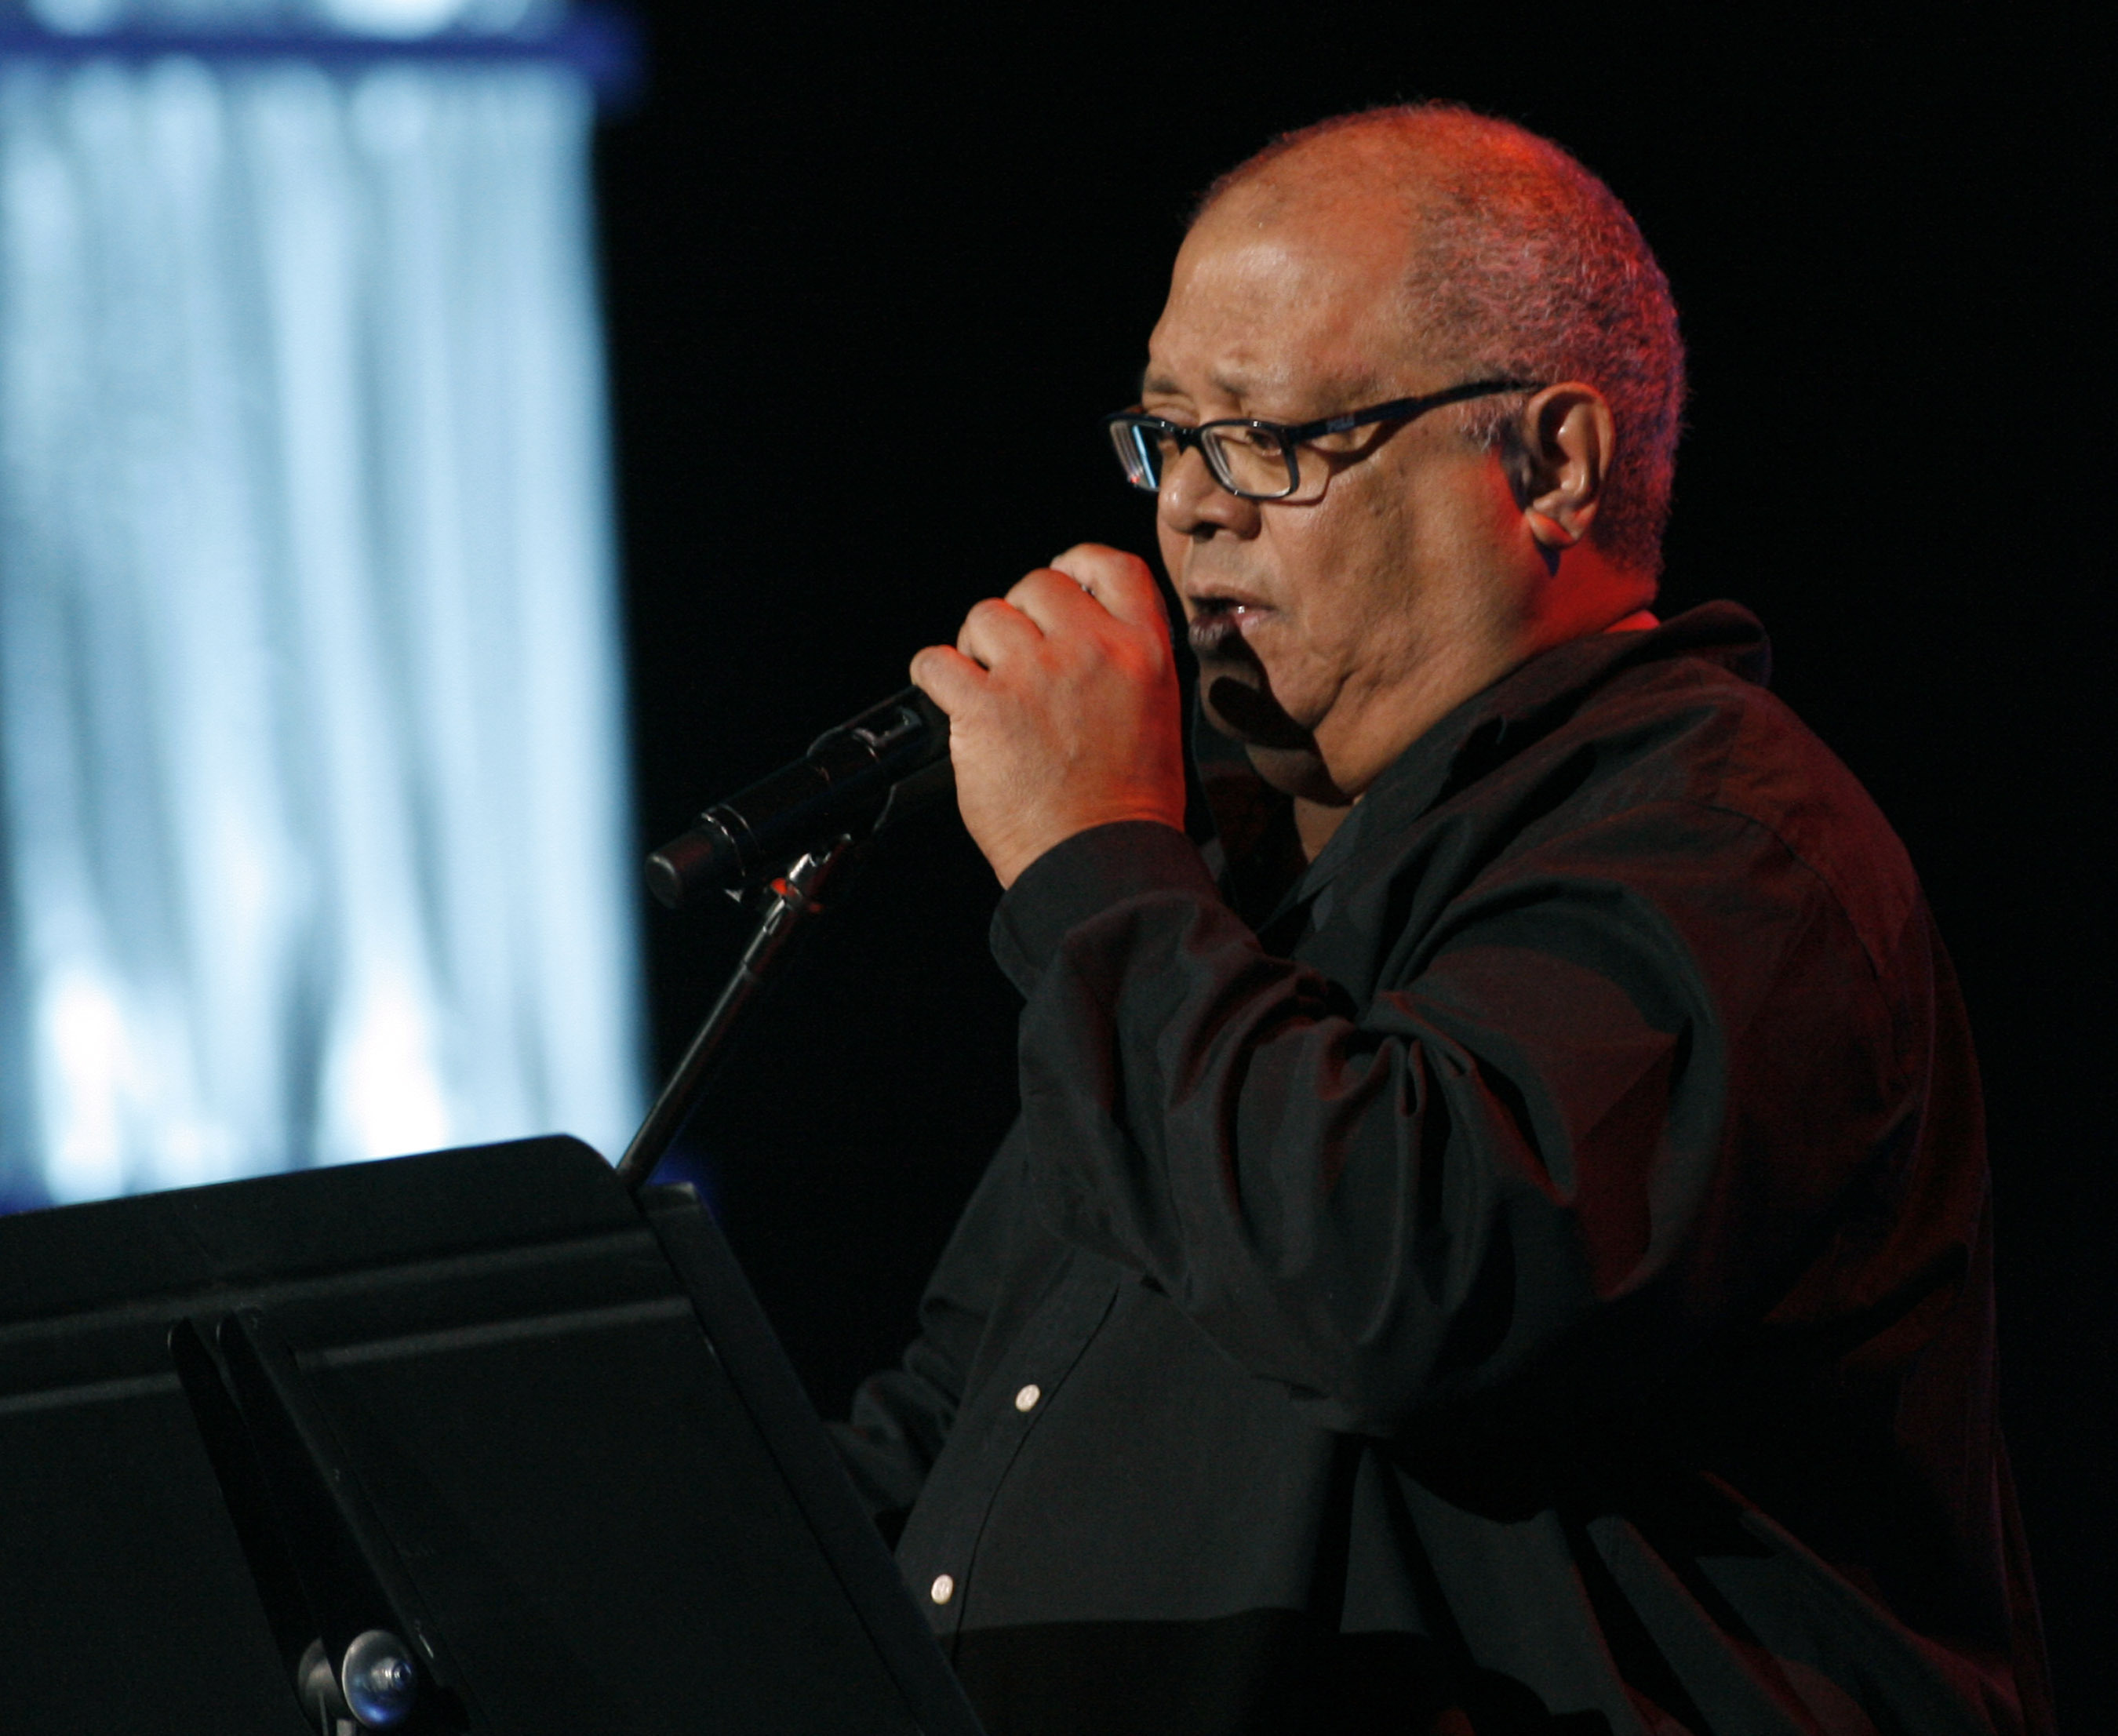 FILE - Cuban singer Pablo Milanés during a concert on August 27, 2011 in Miami.  Milanés died in Madrid on November 22, 2022, his office reported.  He was 79 years old.  (AP Photo/Jeffrey M. Boan, File)